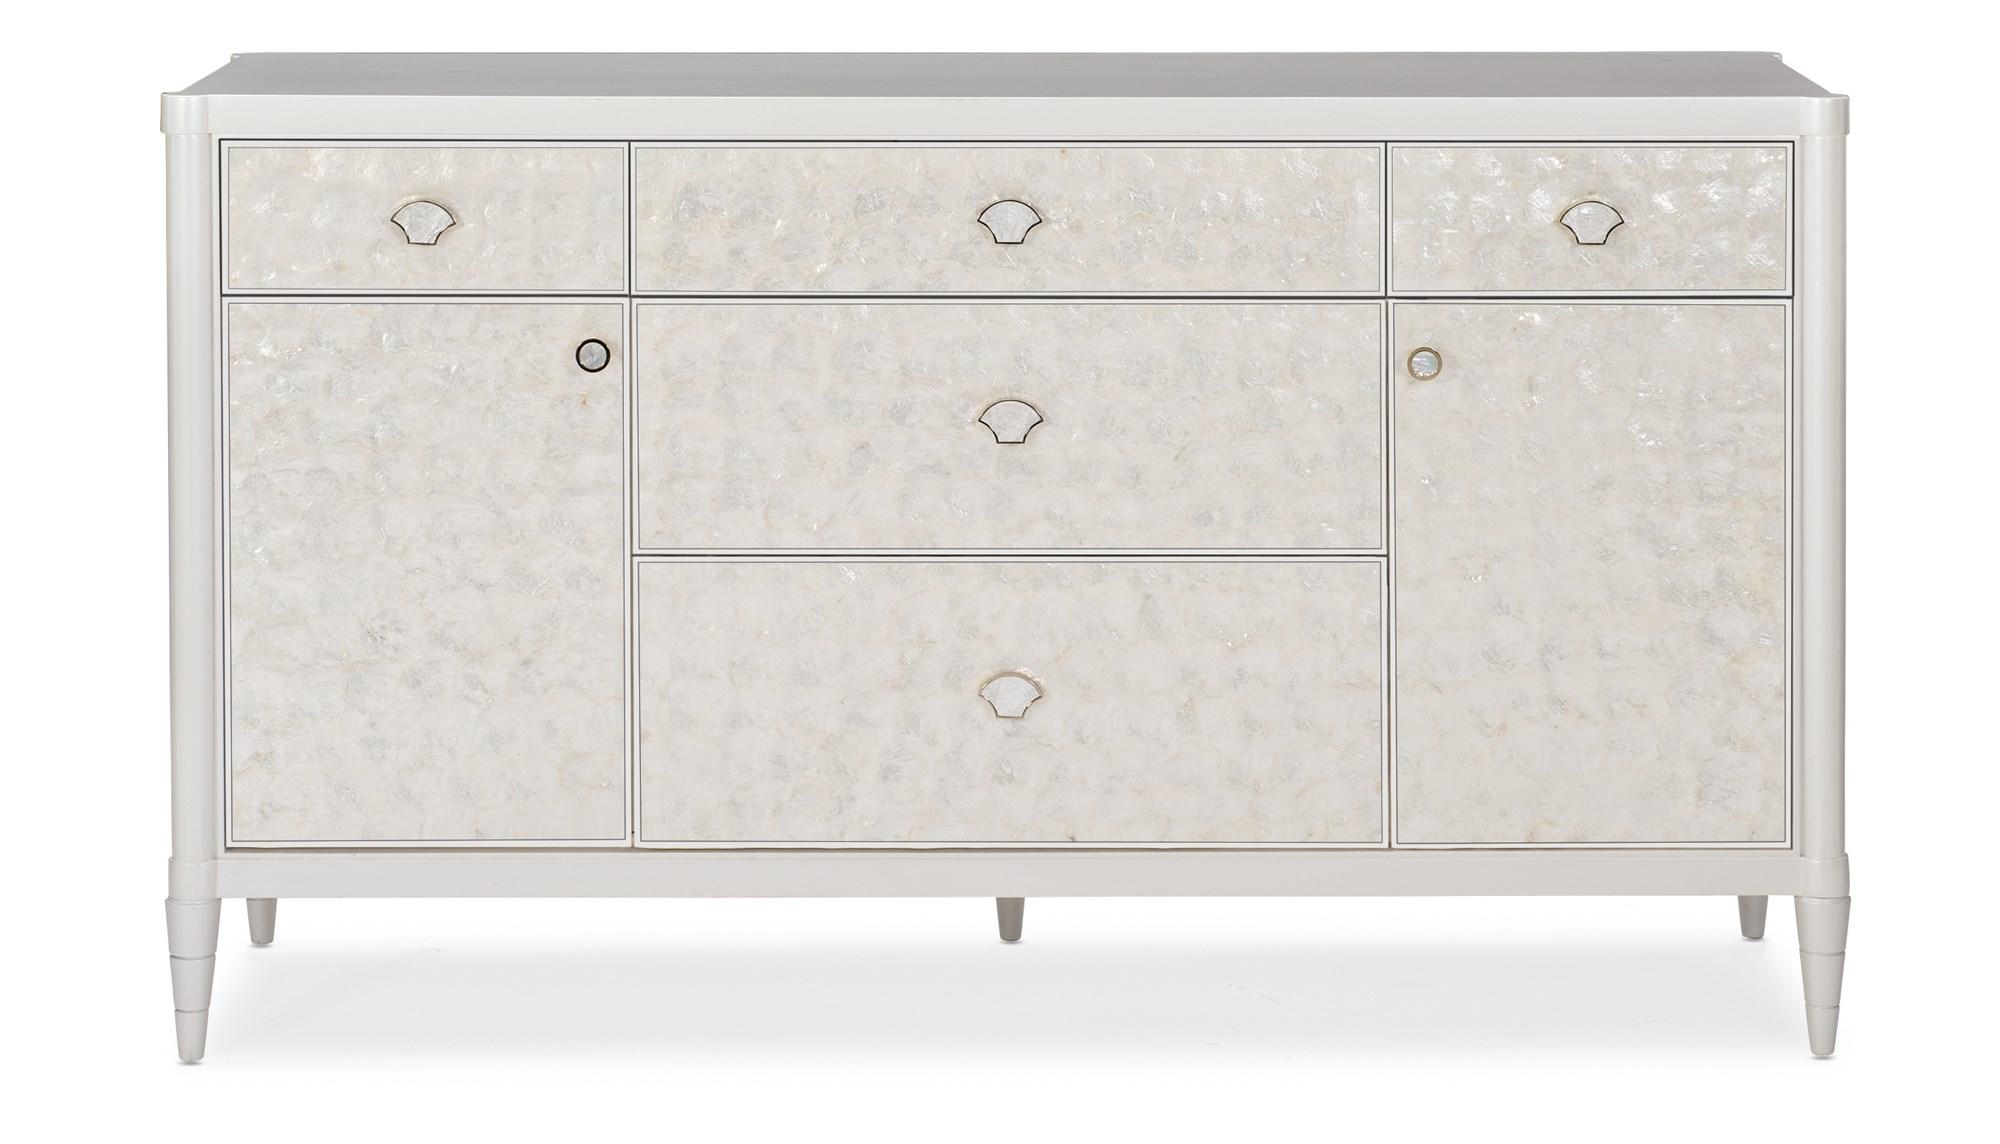 

    
Oyster & White Capiz Shell Finish Contemporary Dresser MOONRISE by Caracole
